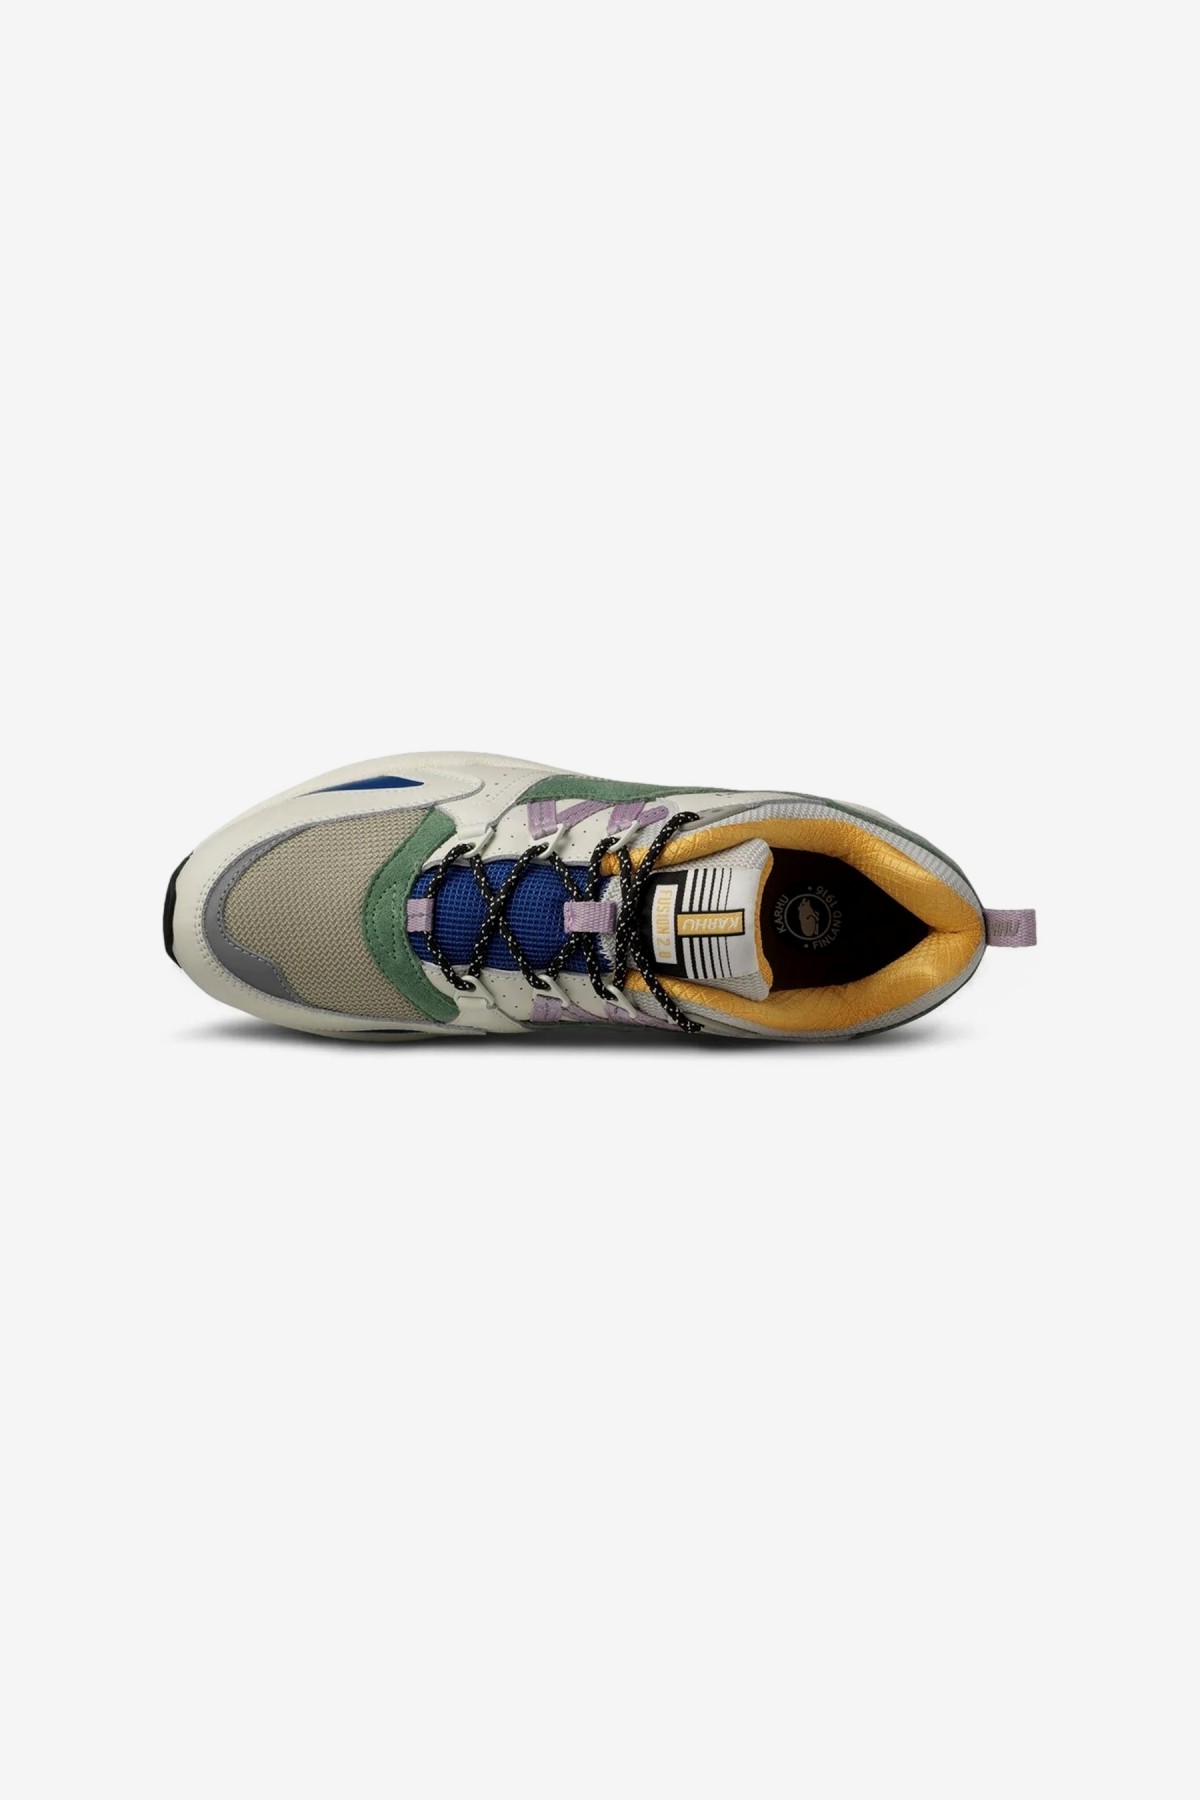 Karhu Fusion 2.0 in Lily White / Loden Frost